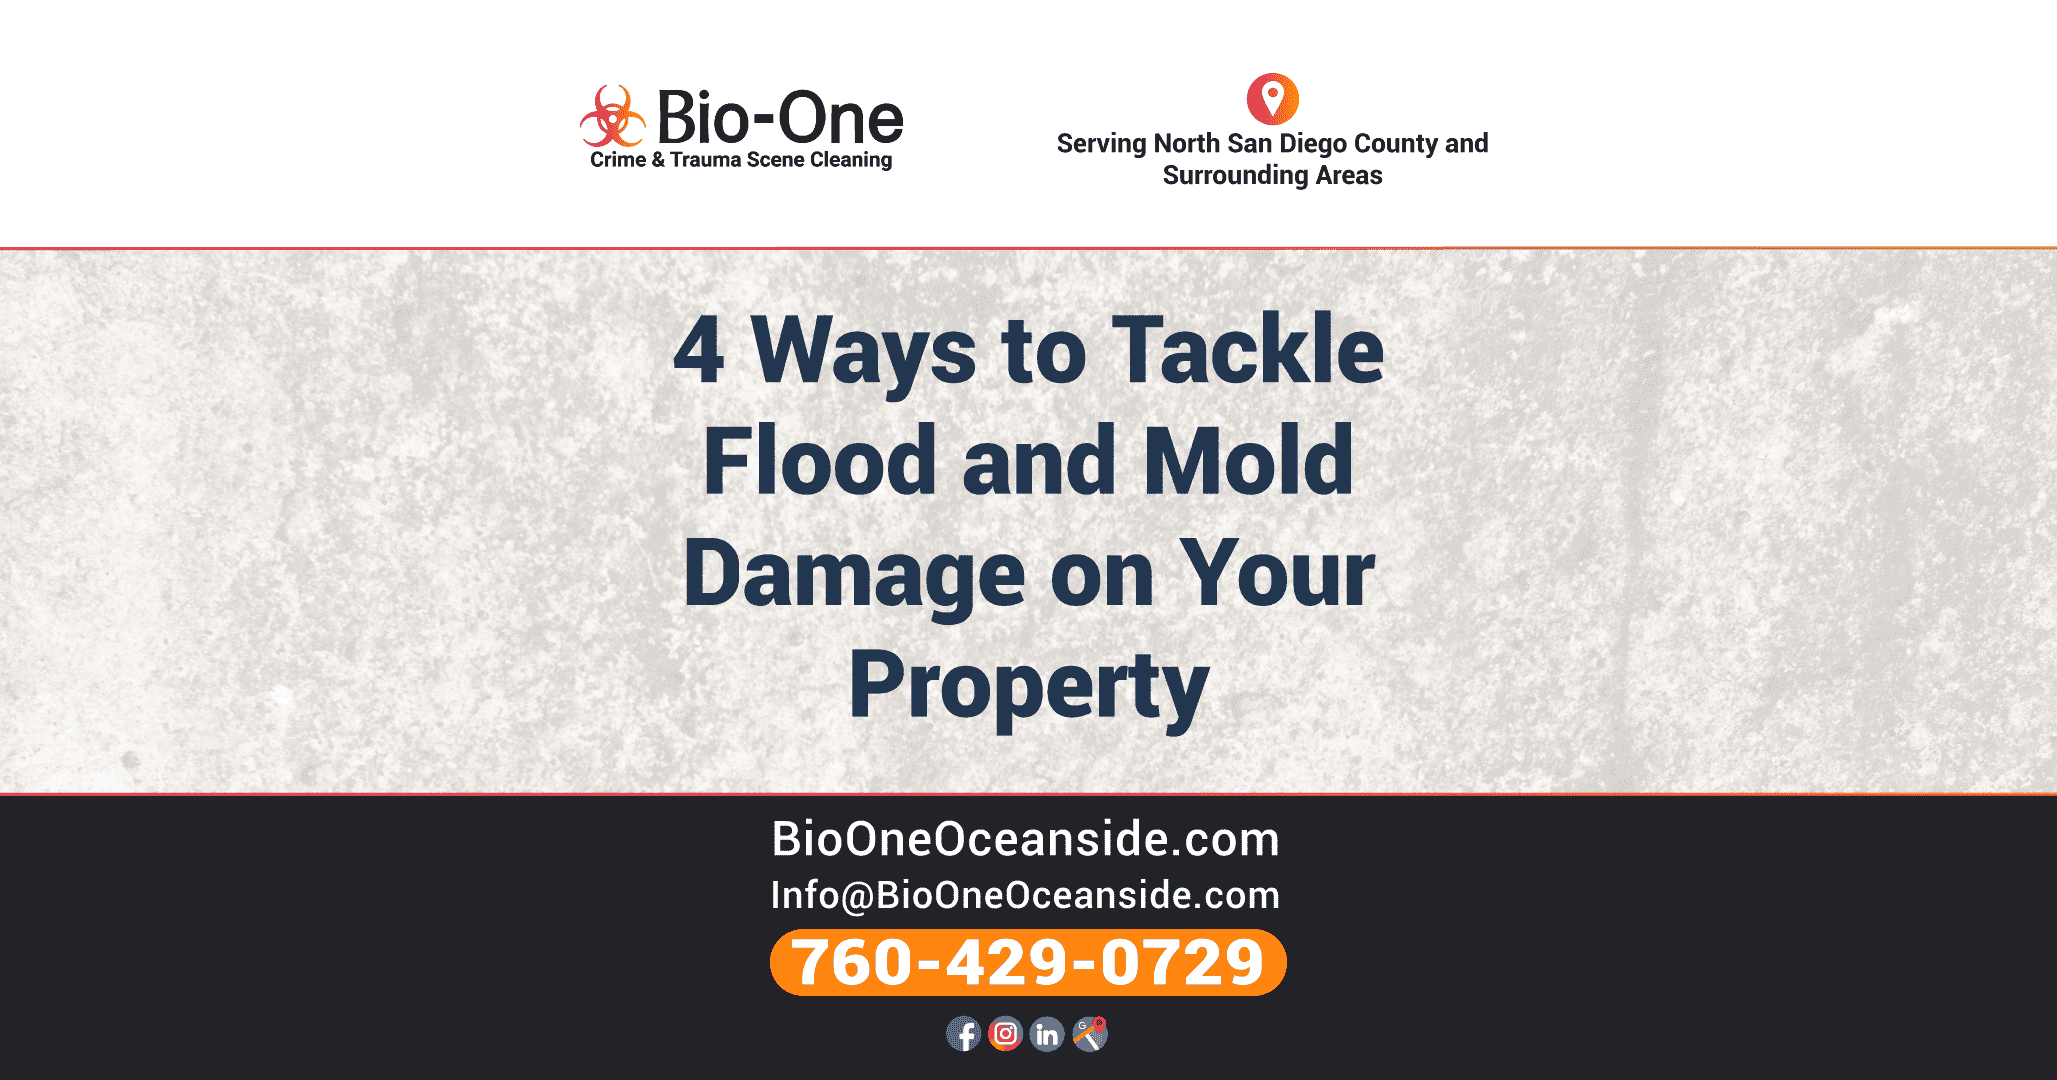 4 Ways to Tackle Flood and Mold Damage on Your Property